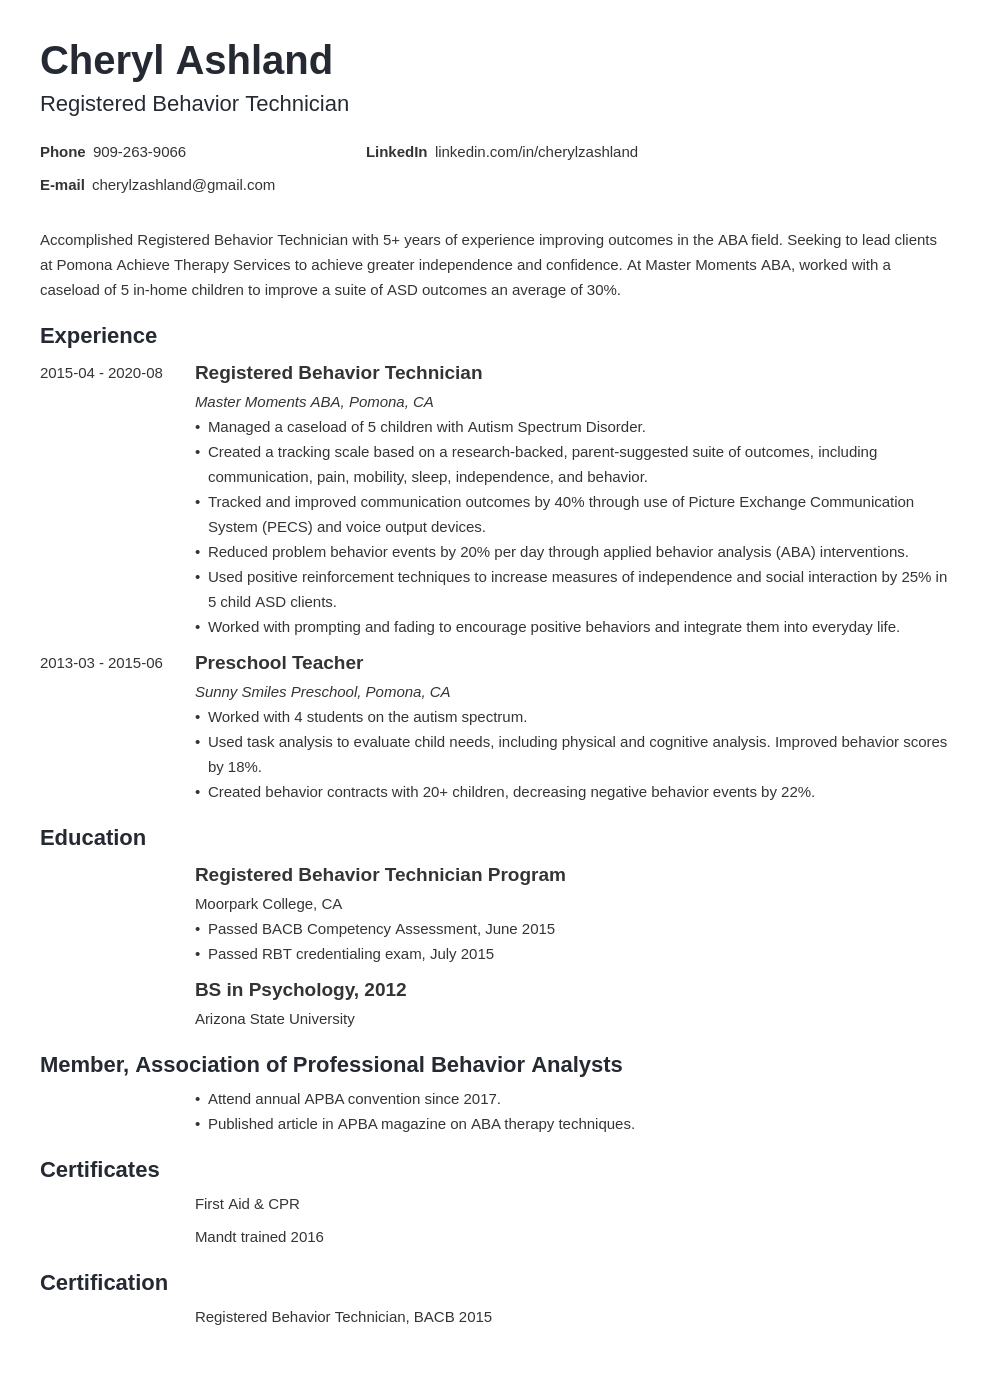 rbt resume examples no experience